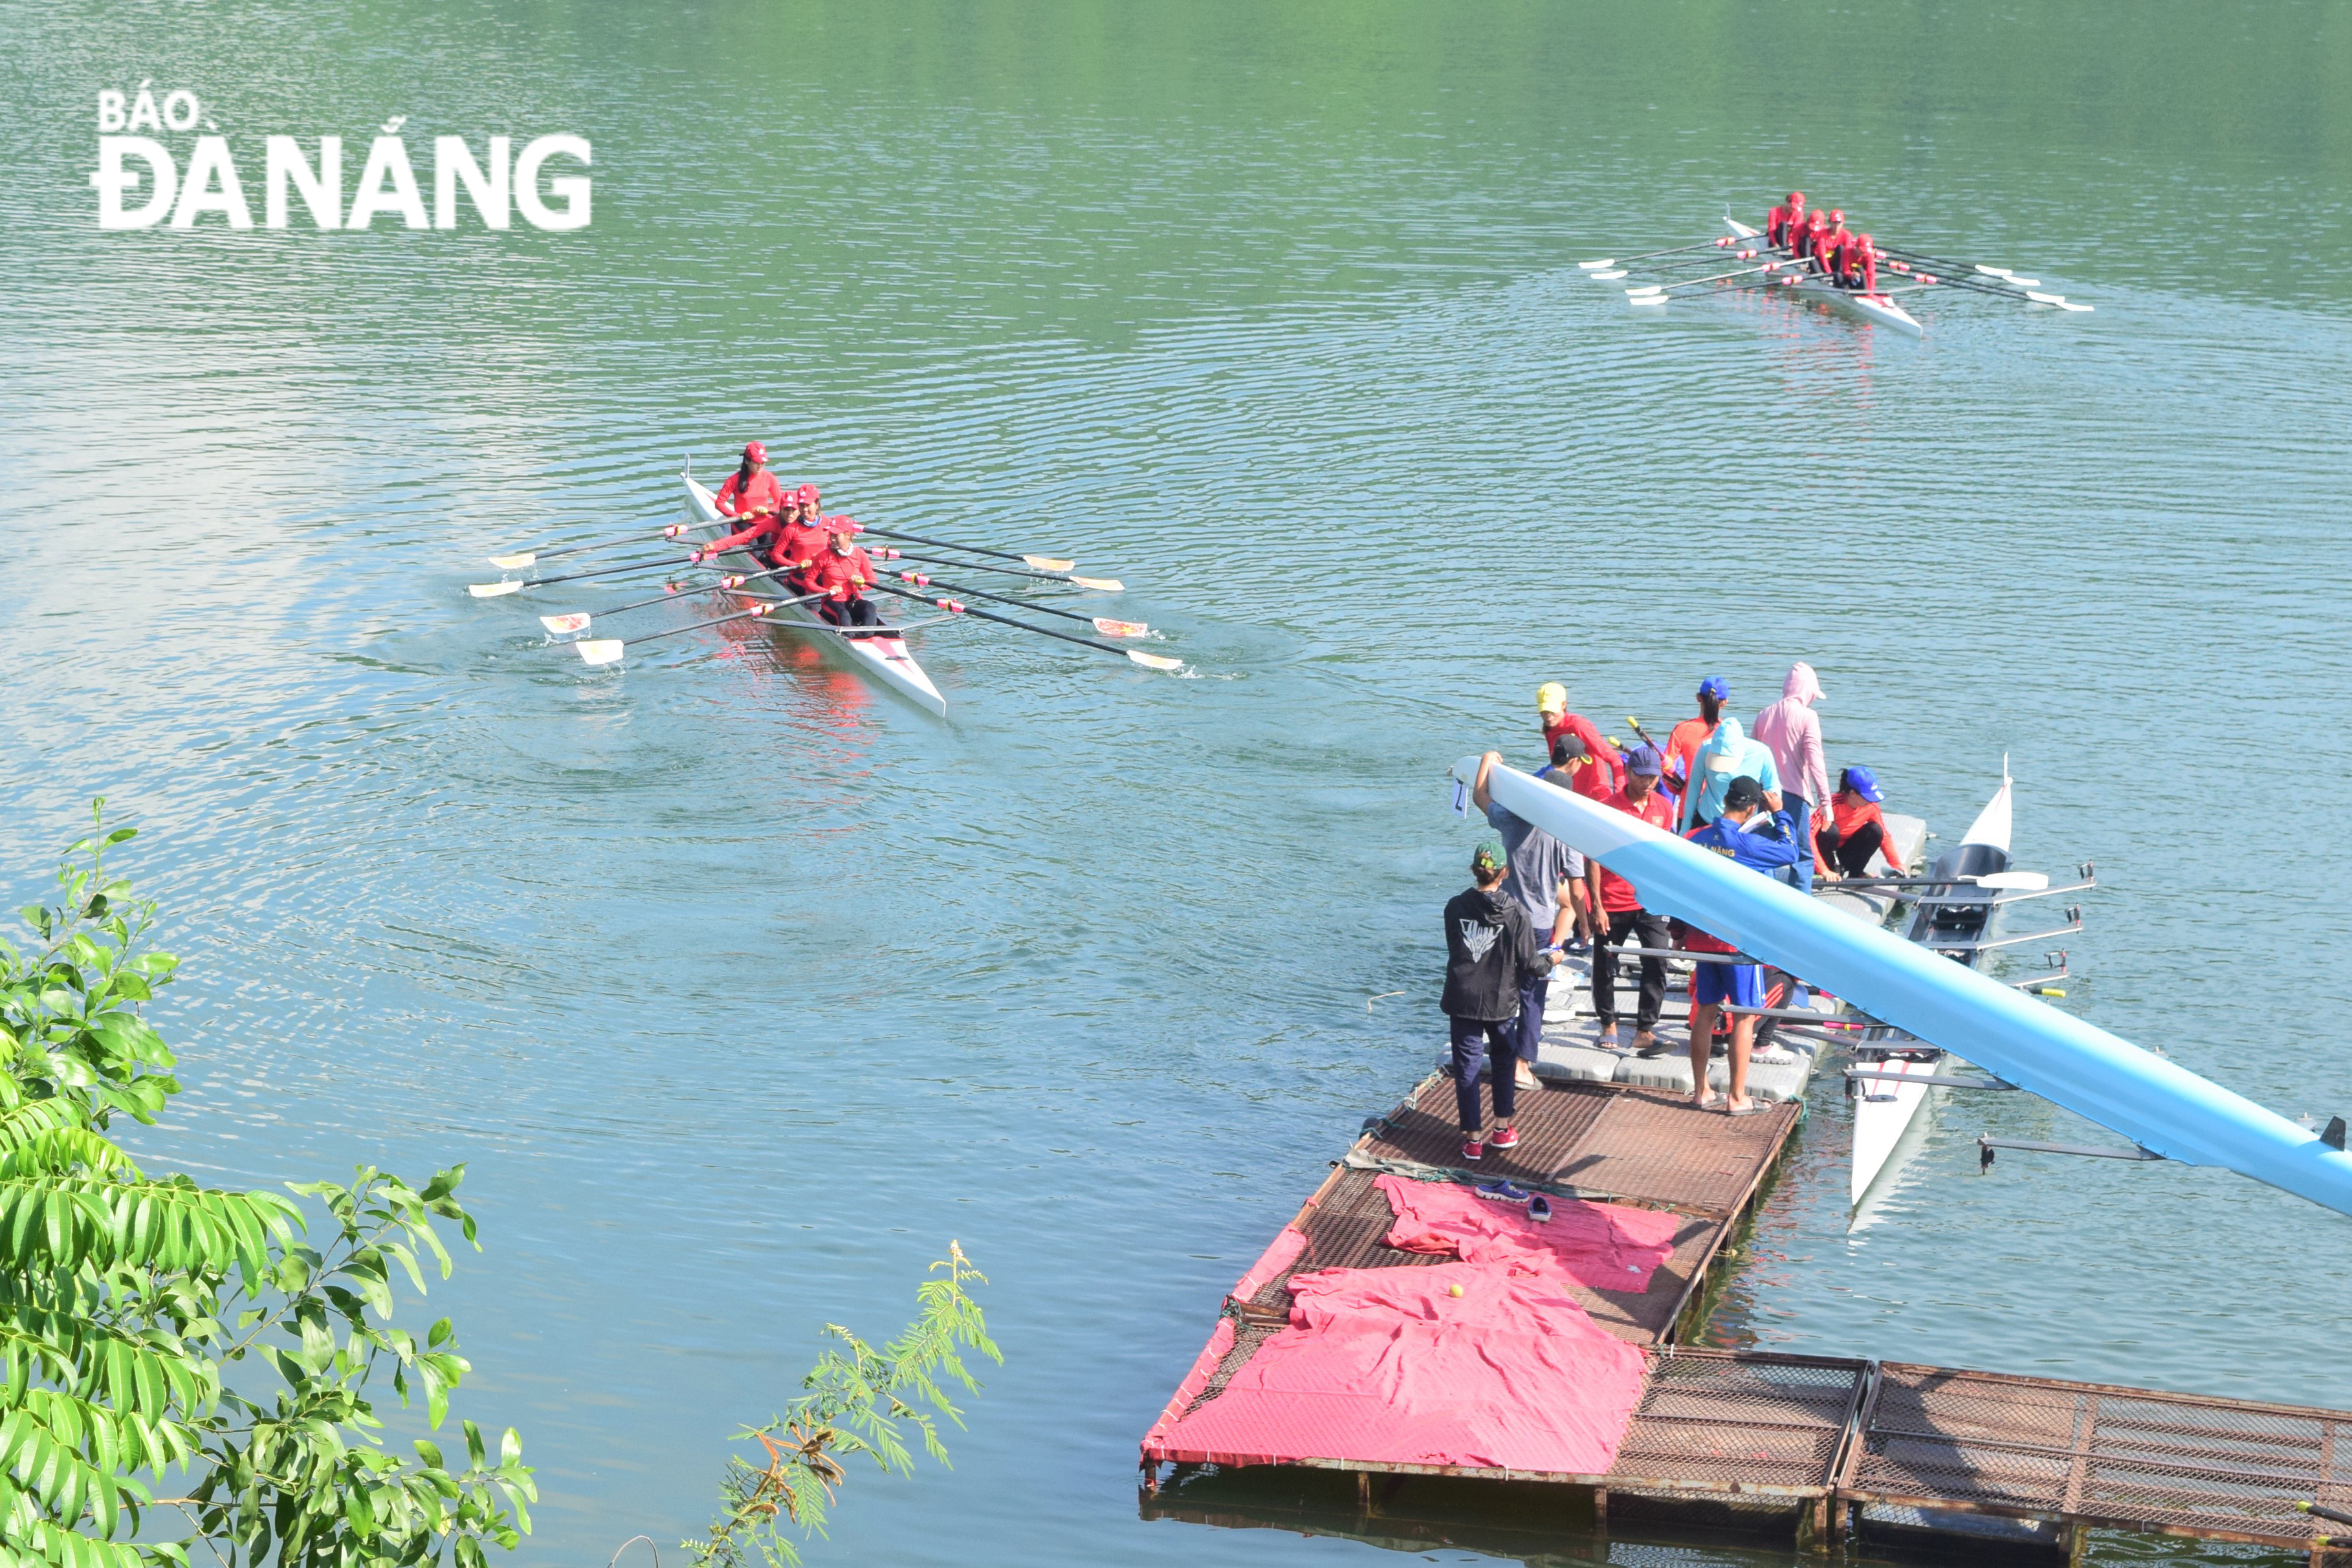  Members of the city's boat rowing team are training hard at the Dong Nghe Lake. Photo: P.N